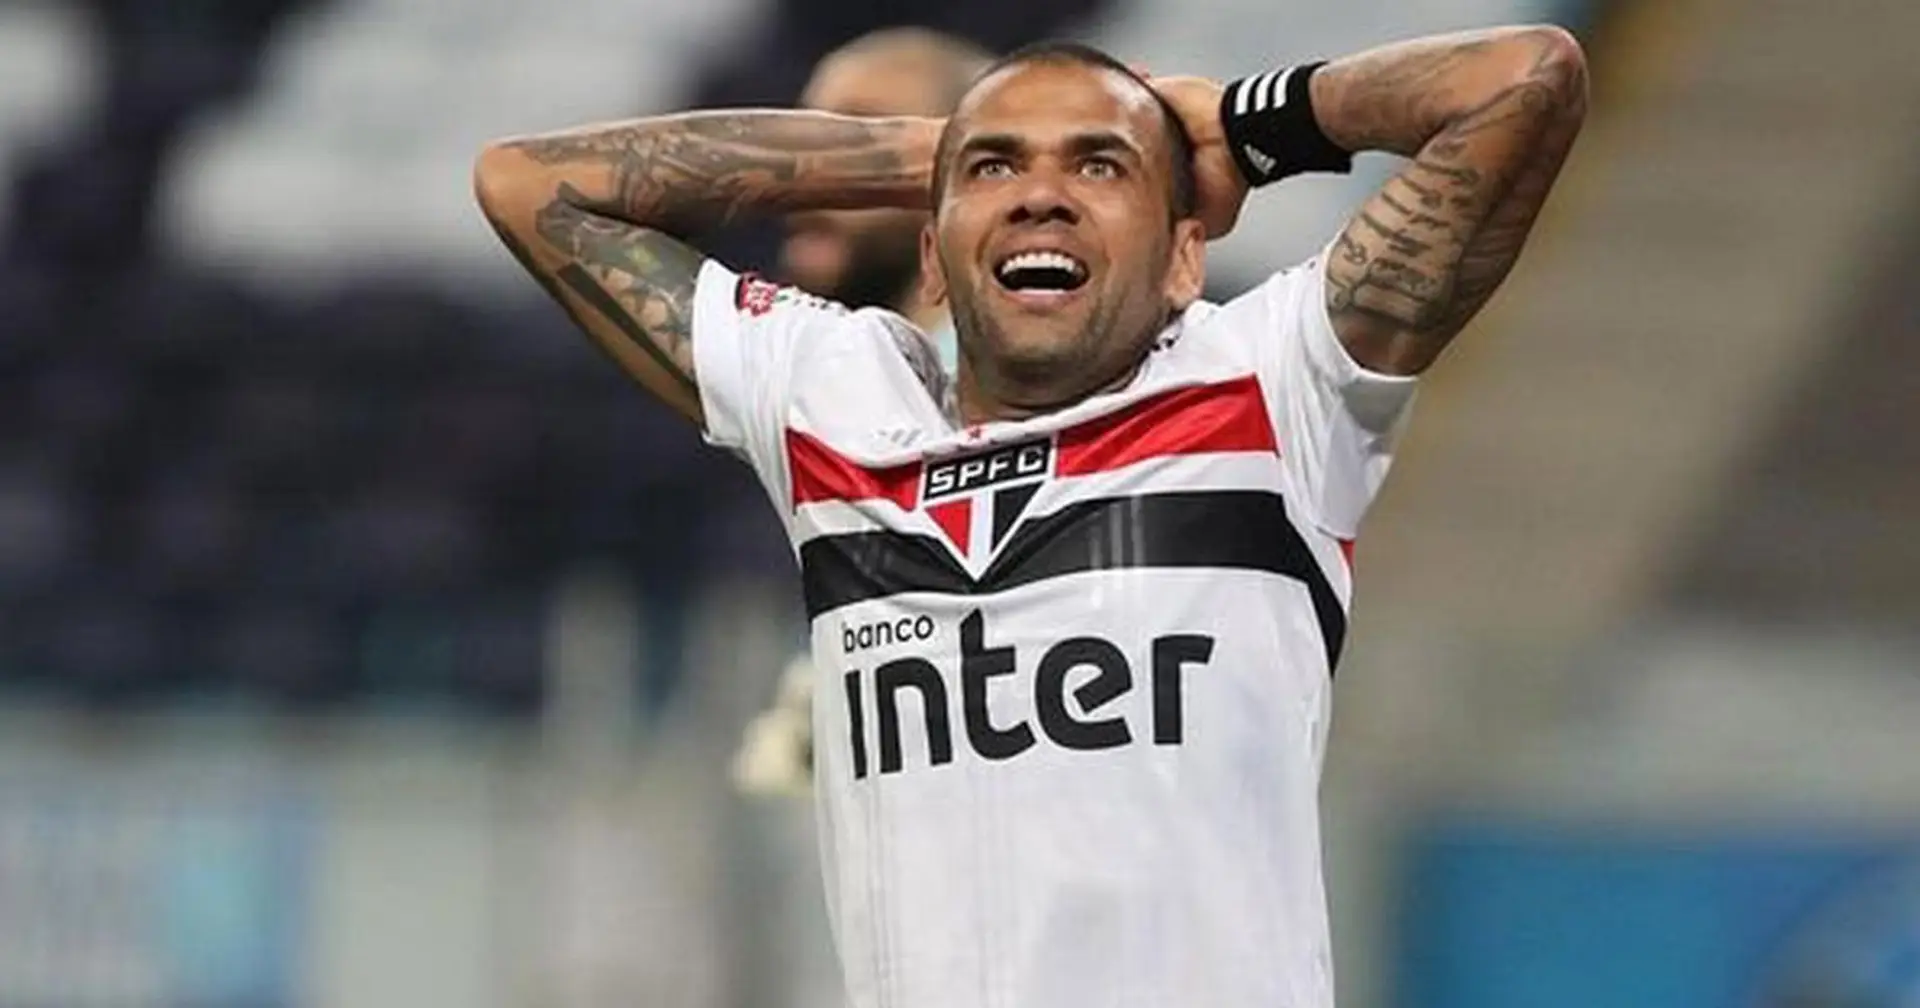 Barca yet to respond to Dani Alves amid internal debate over his signing (reliability: 5 stars)